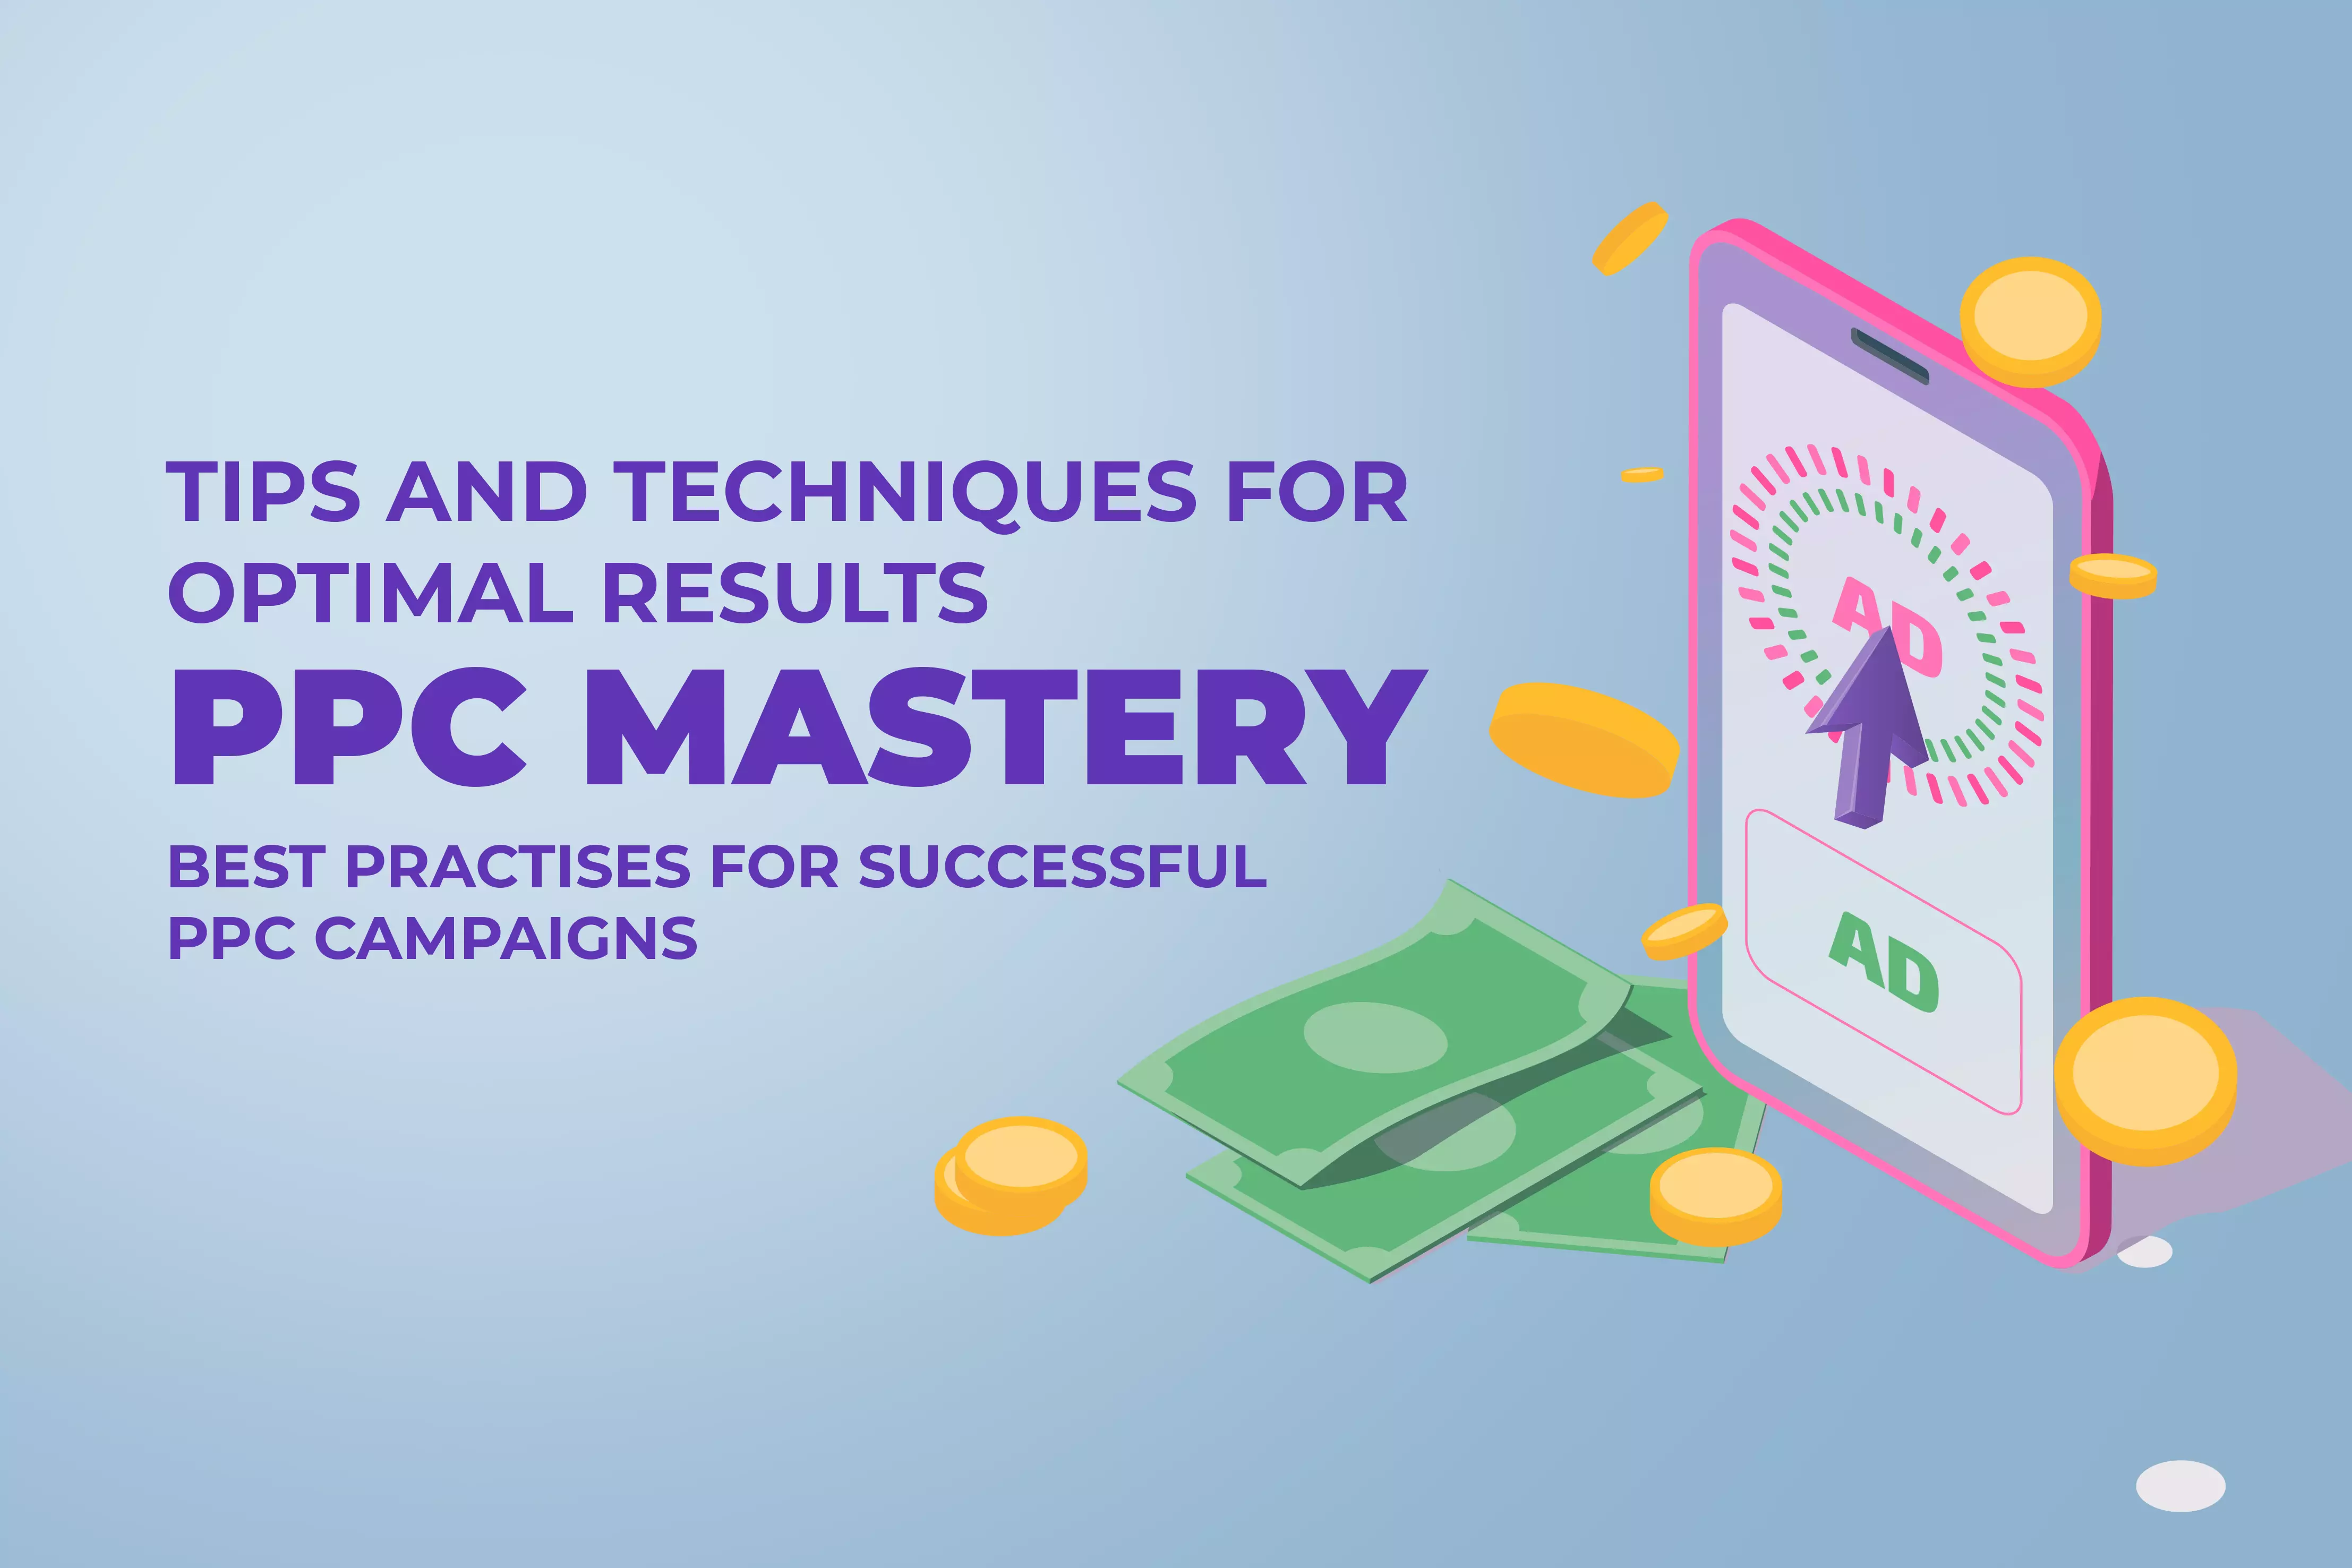 PPC Mastery: Tips and Techniques for Optimal Results